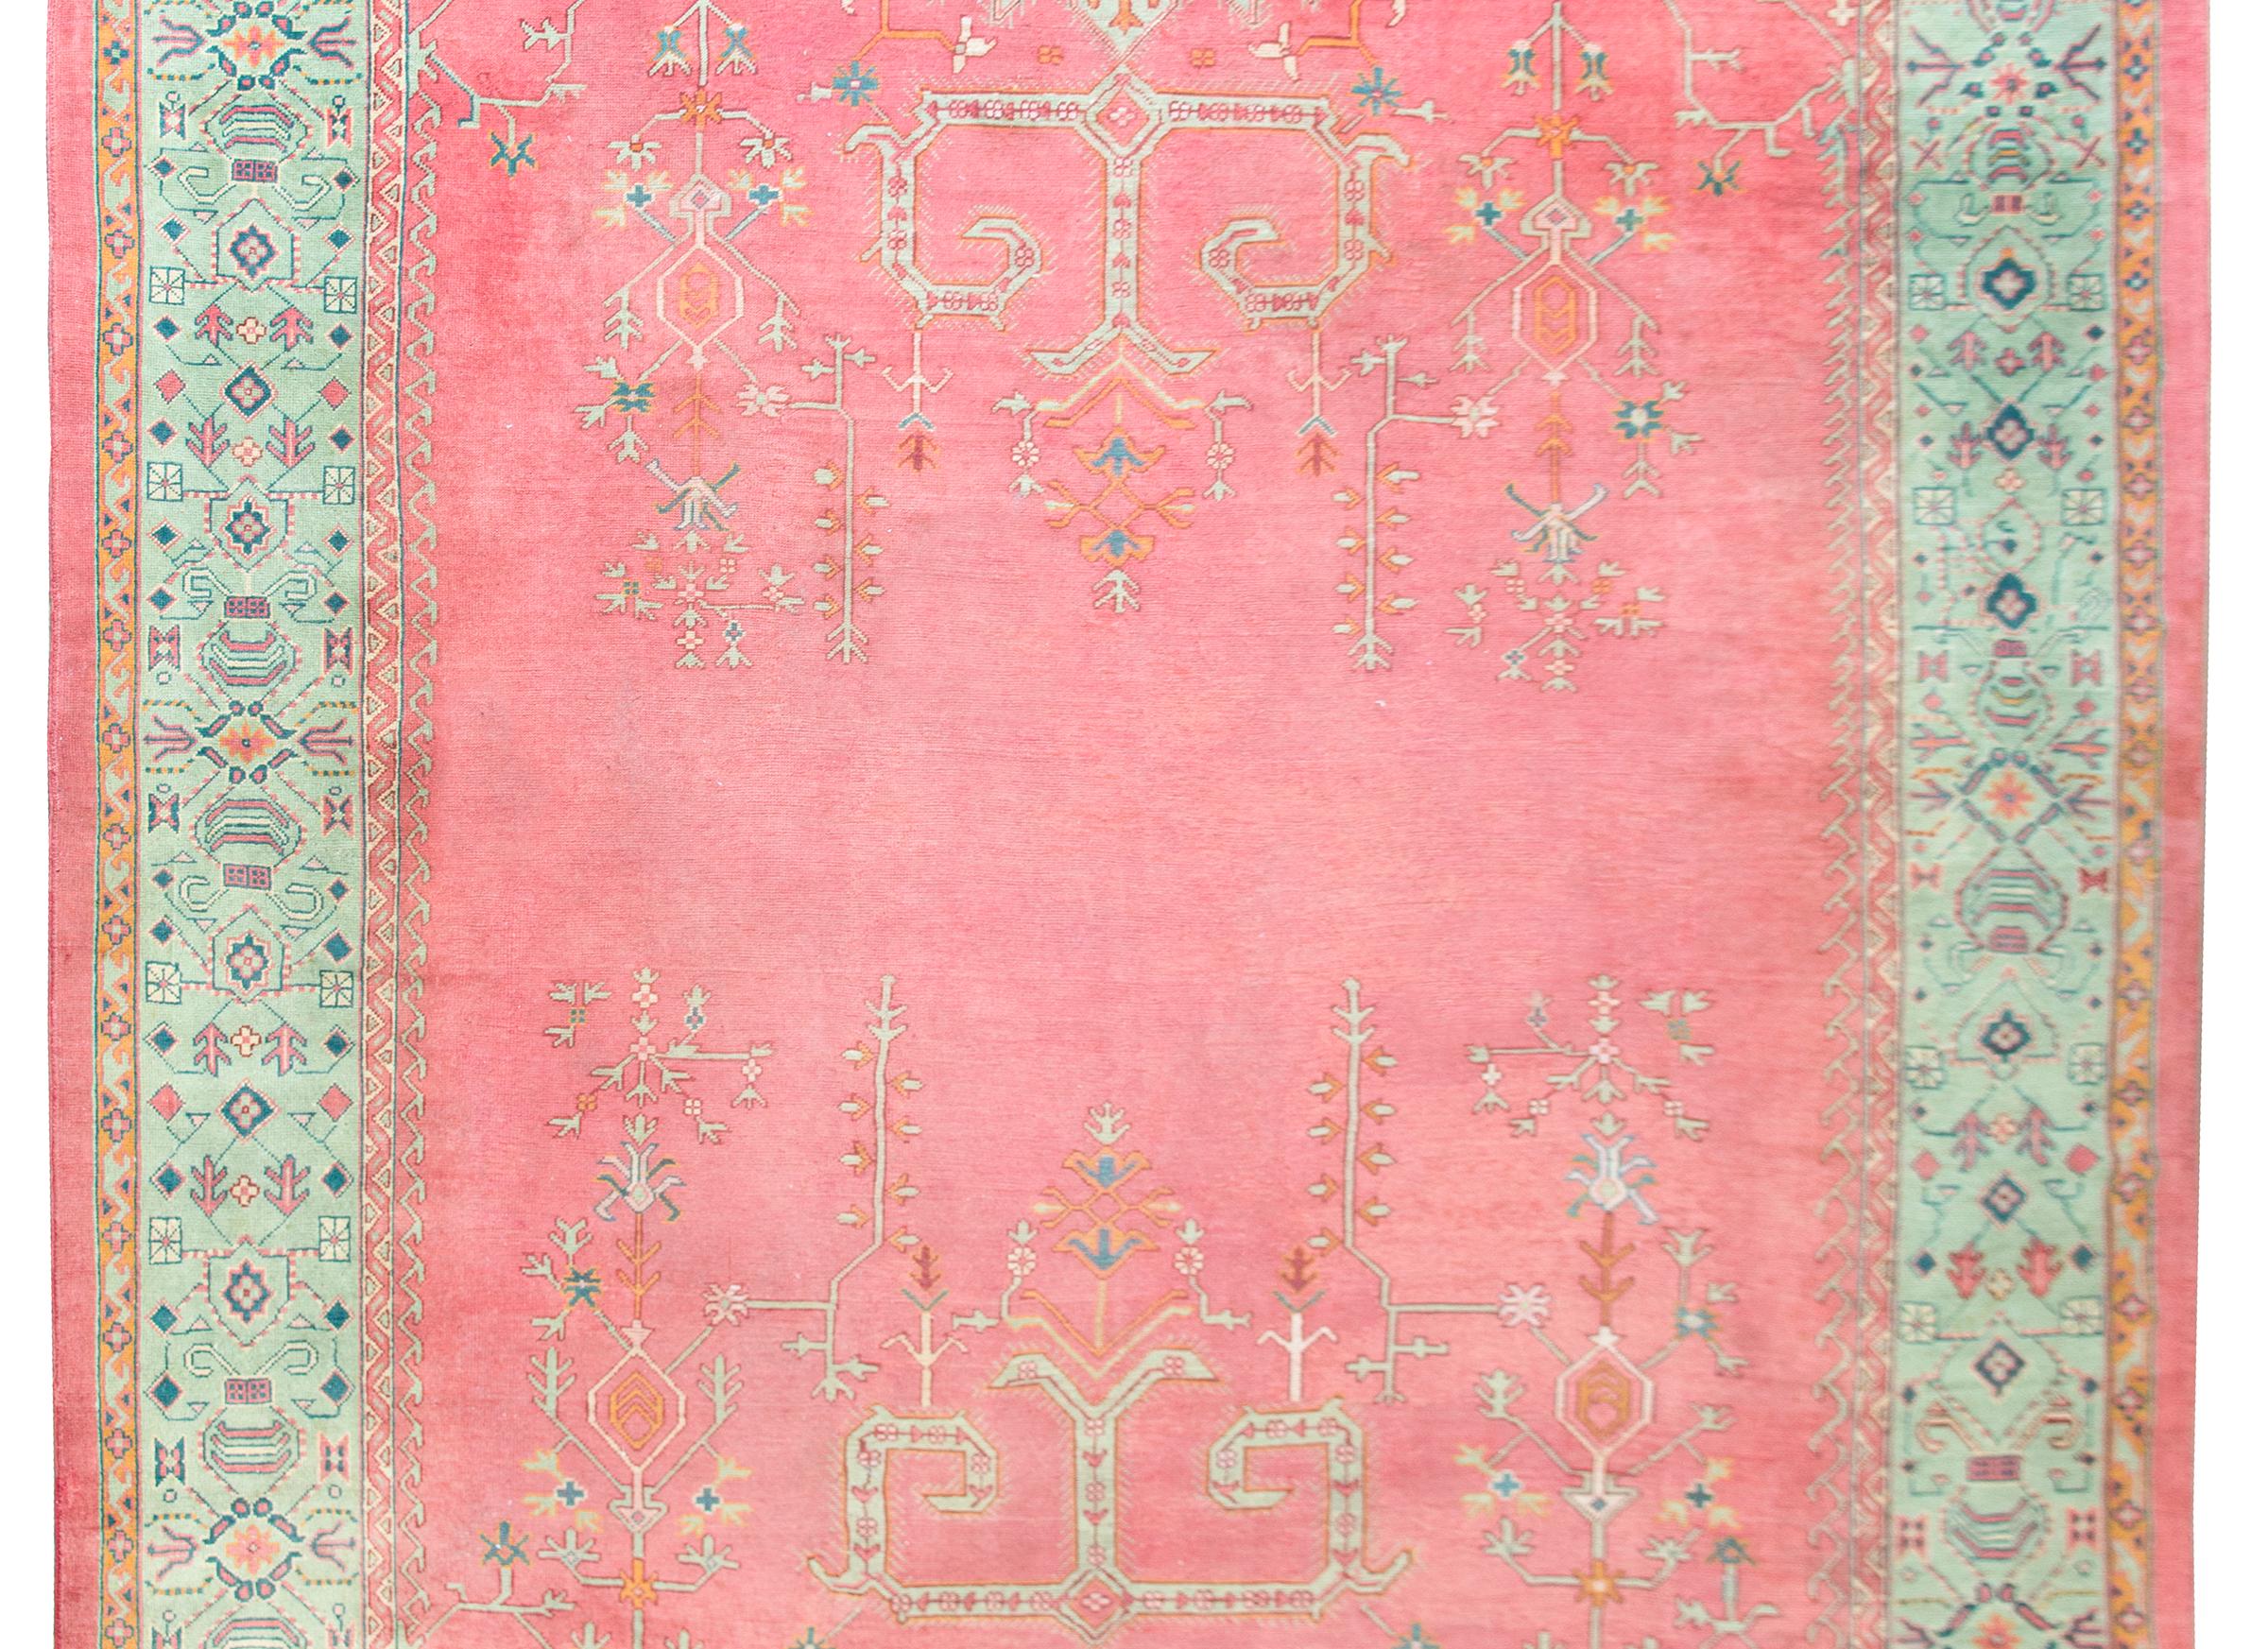 A brilliant early 20th century Turkish Oushak rug with a beautiful pink field overlaid with turquoise, orange, and indigo stylized scrolling vines and flowers, and surrounded by a wide border with more large-scale flowers and scrolling vines.